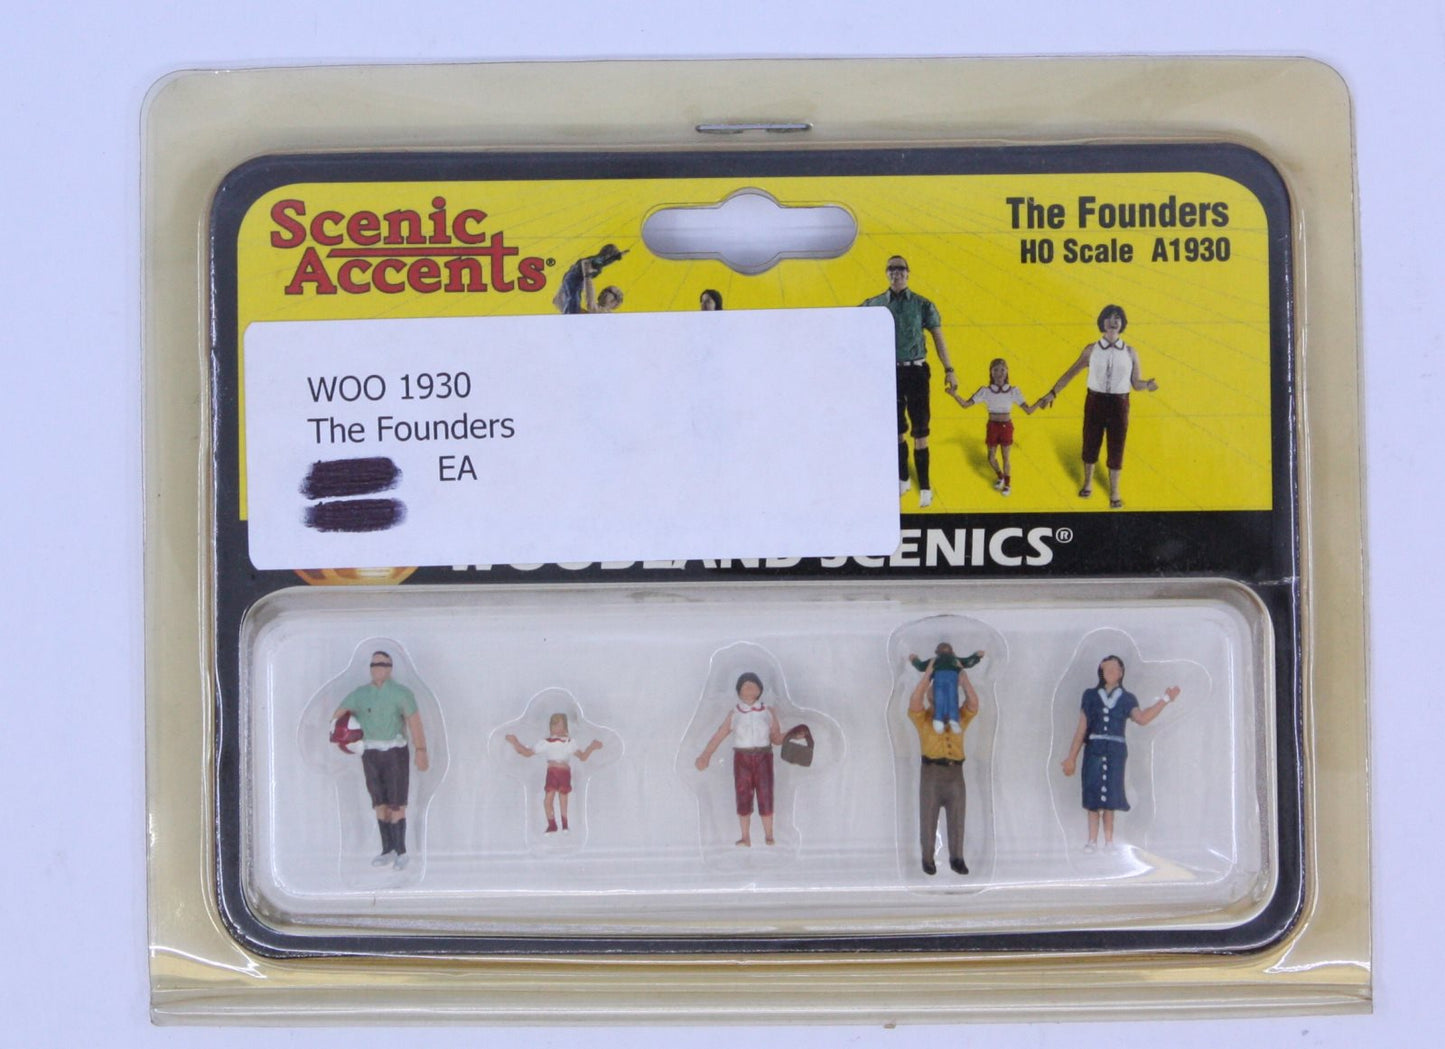 Woodland Scenics A1930 HO Scenic Accents The Founders Figures (Set of 5)